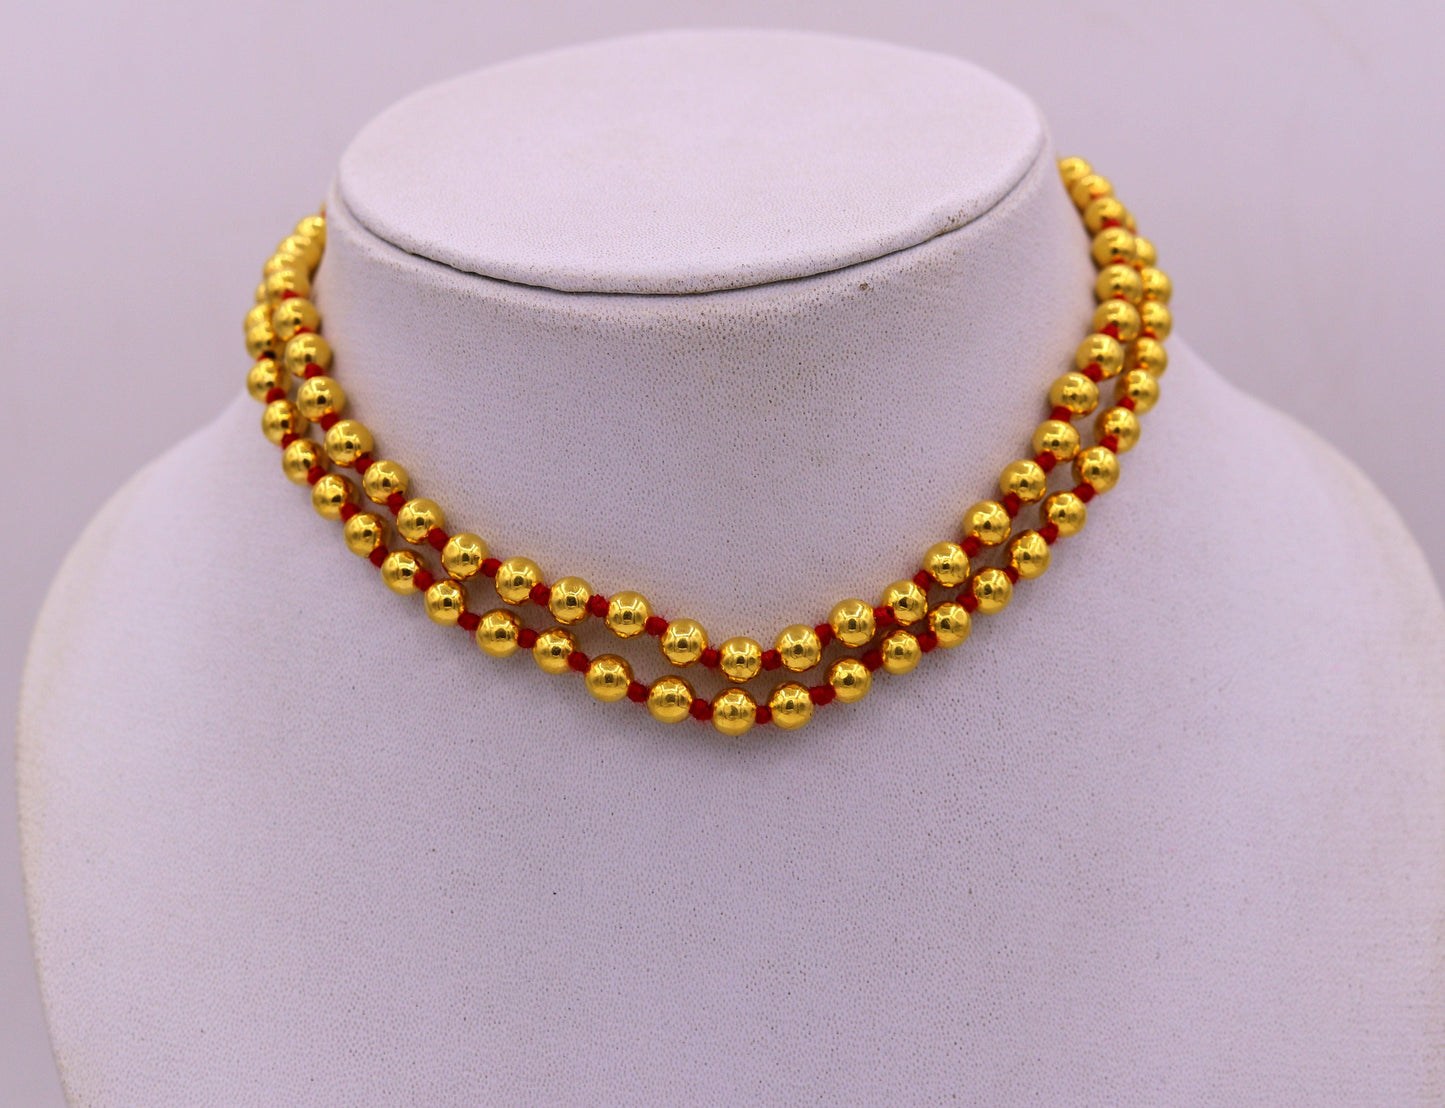 Vintage antique design handmade gold 20kt yellow gold ball beads necklace chain fabulous indian tribal jewelry from india - TRIBAL ORNAMENTS